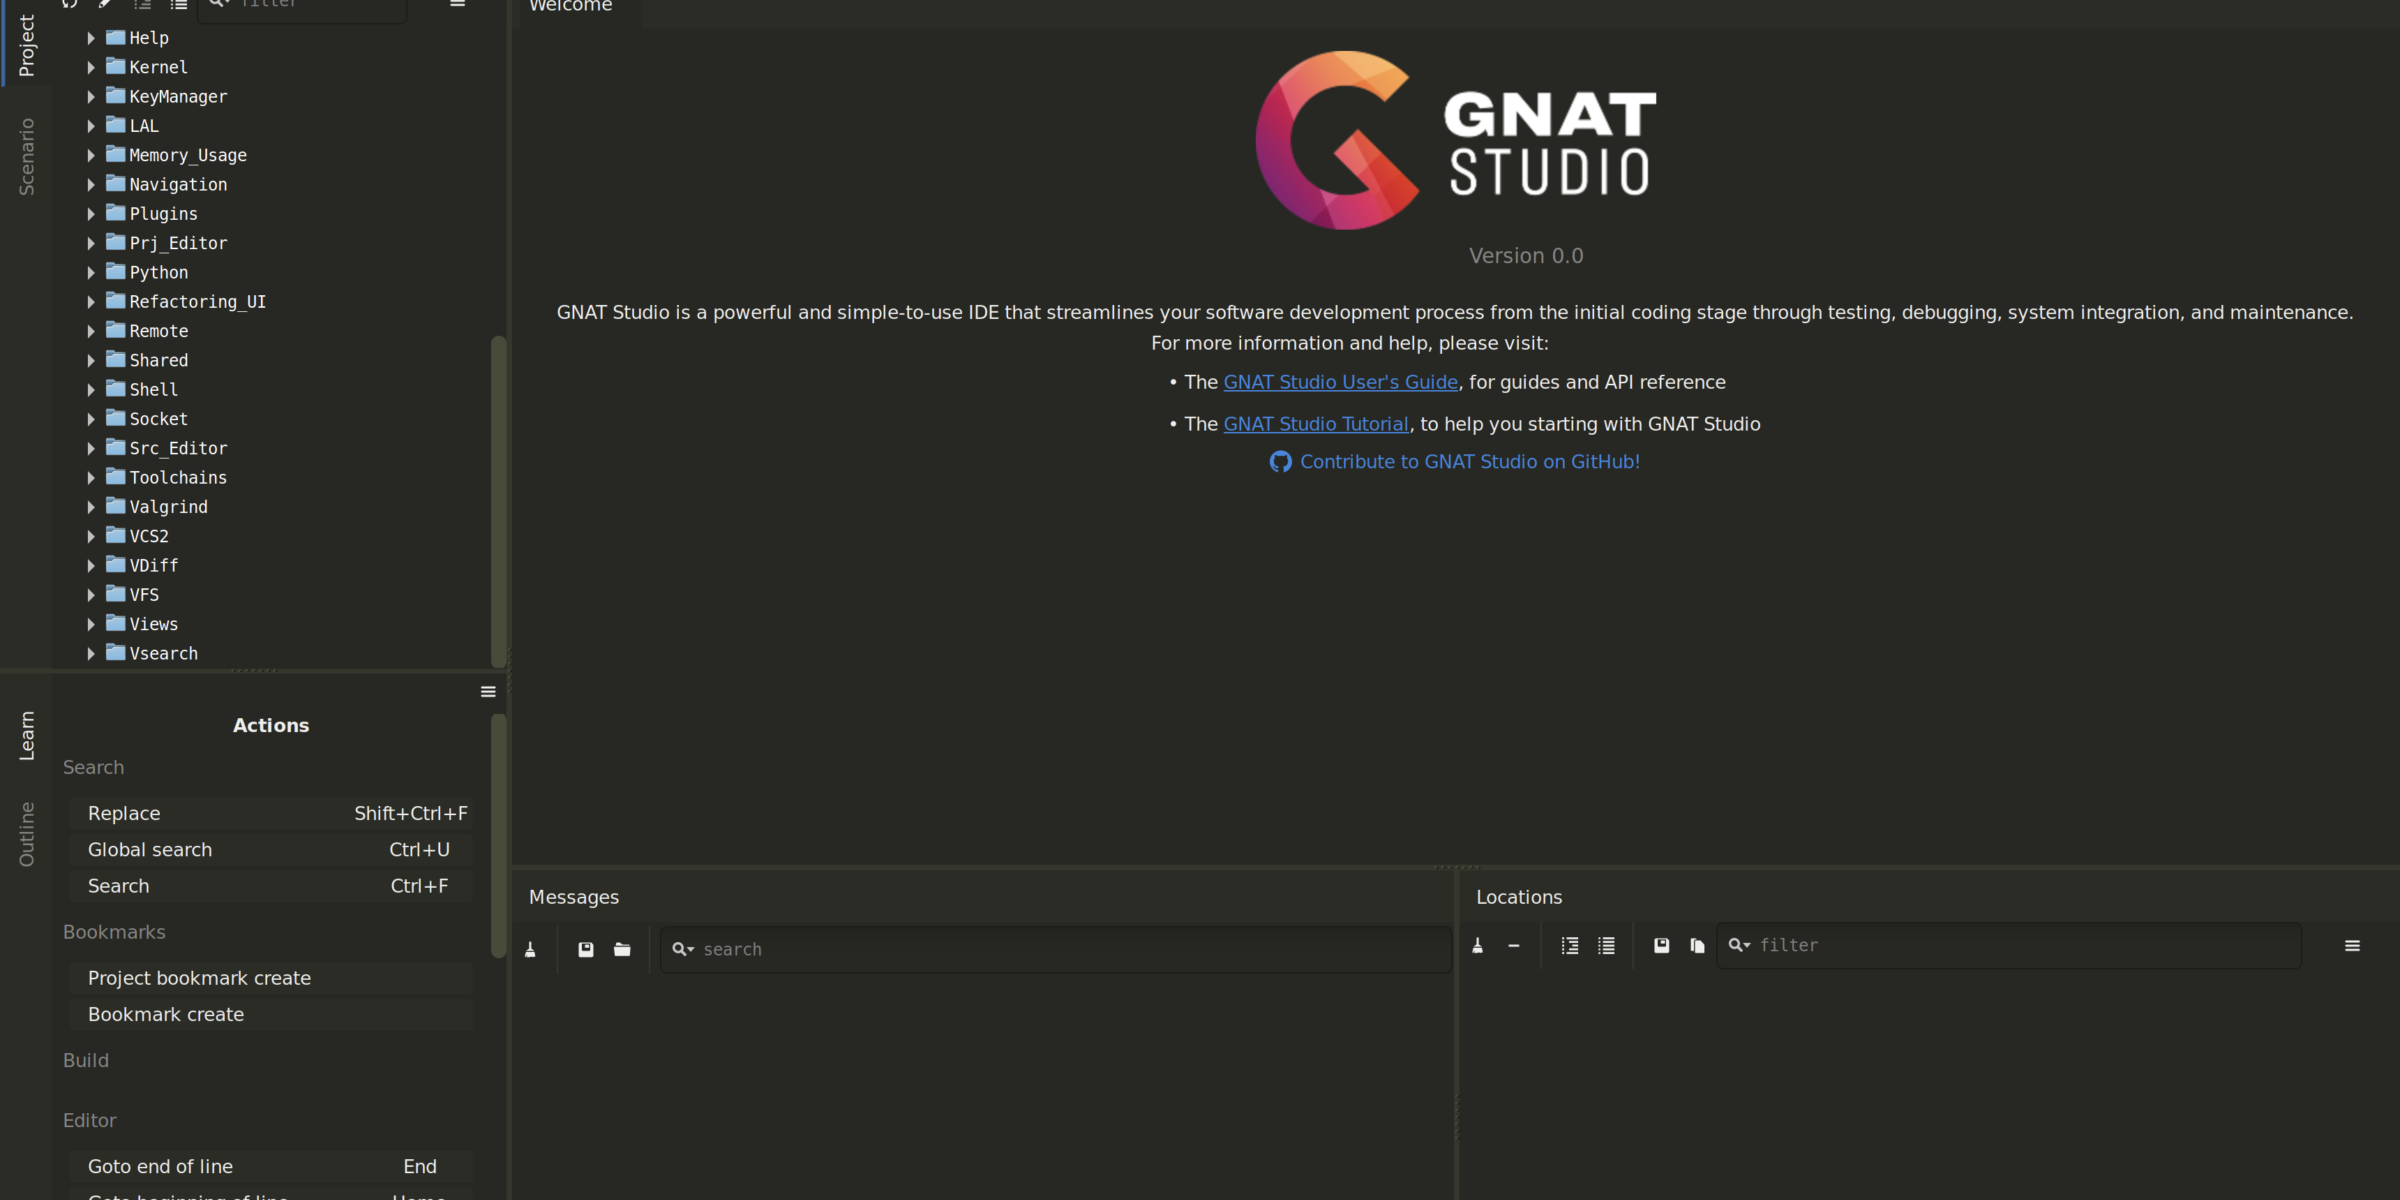 New features for string literals and comments in GNAT Studio